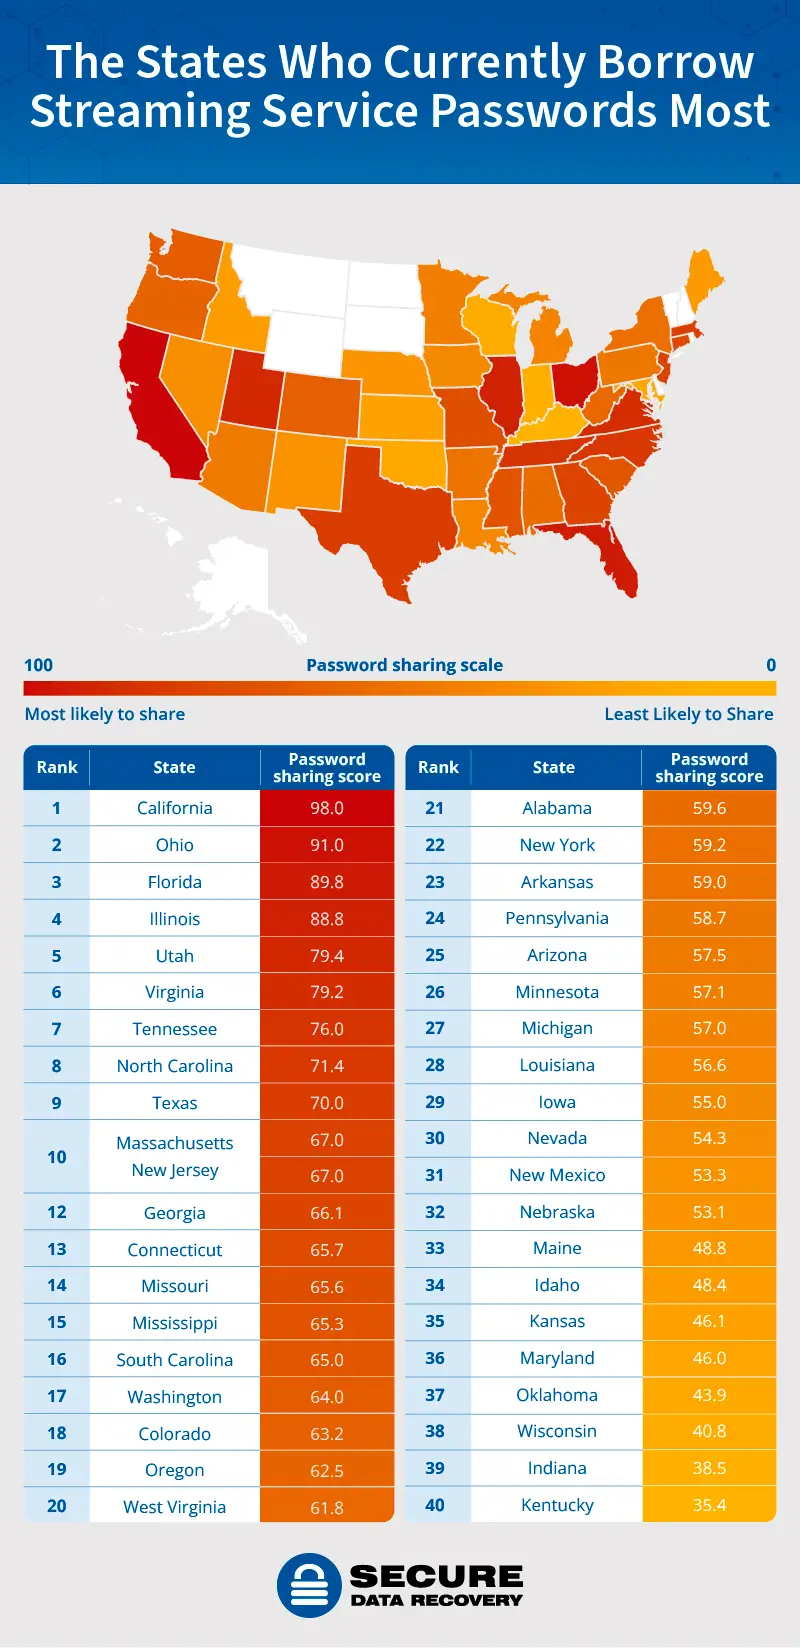 A U.S. heatmap showing the states most and least likely to share passwords